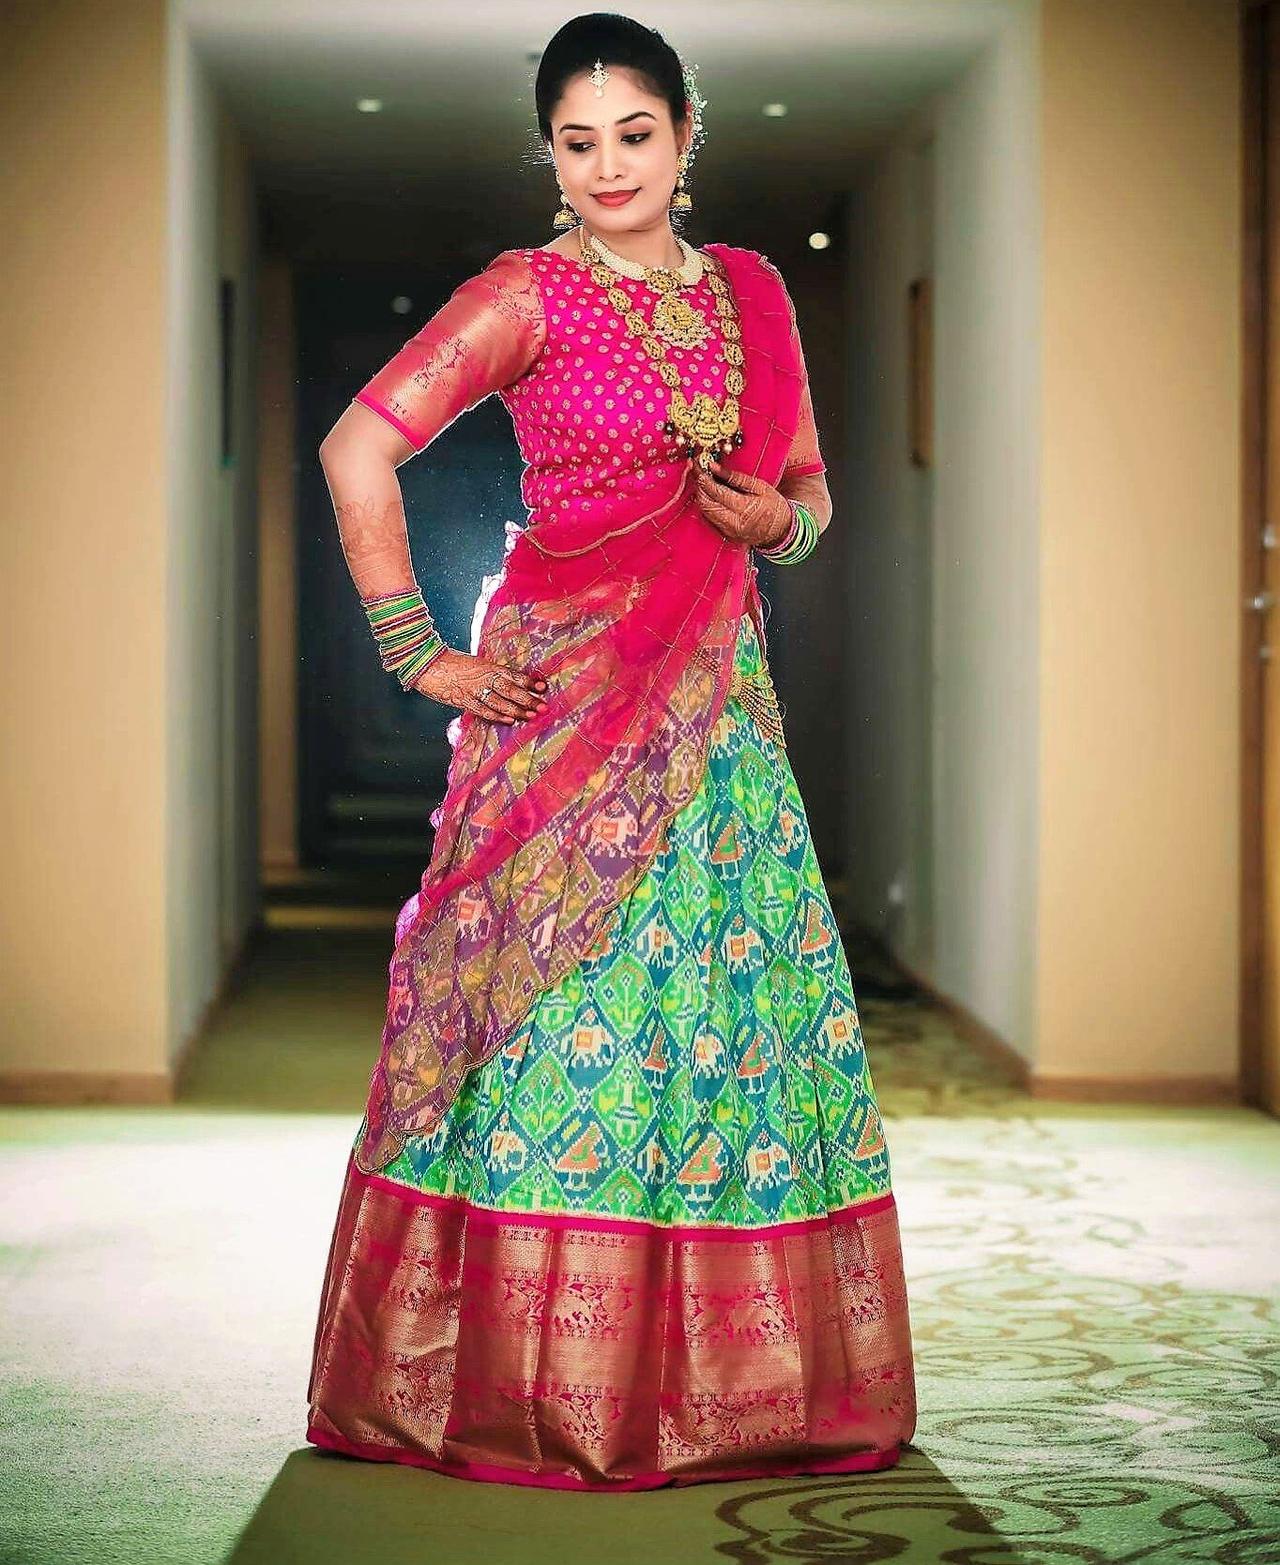 The Lehenga Half Saree: What Is This Garment And Who Should Wear It?